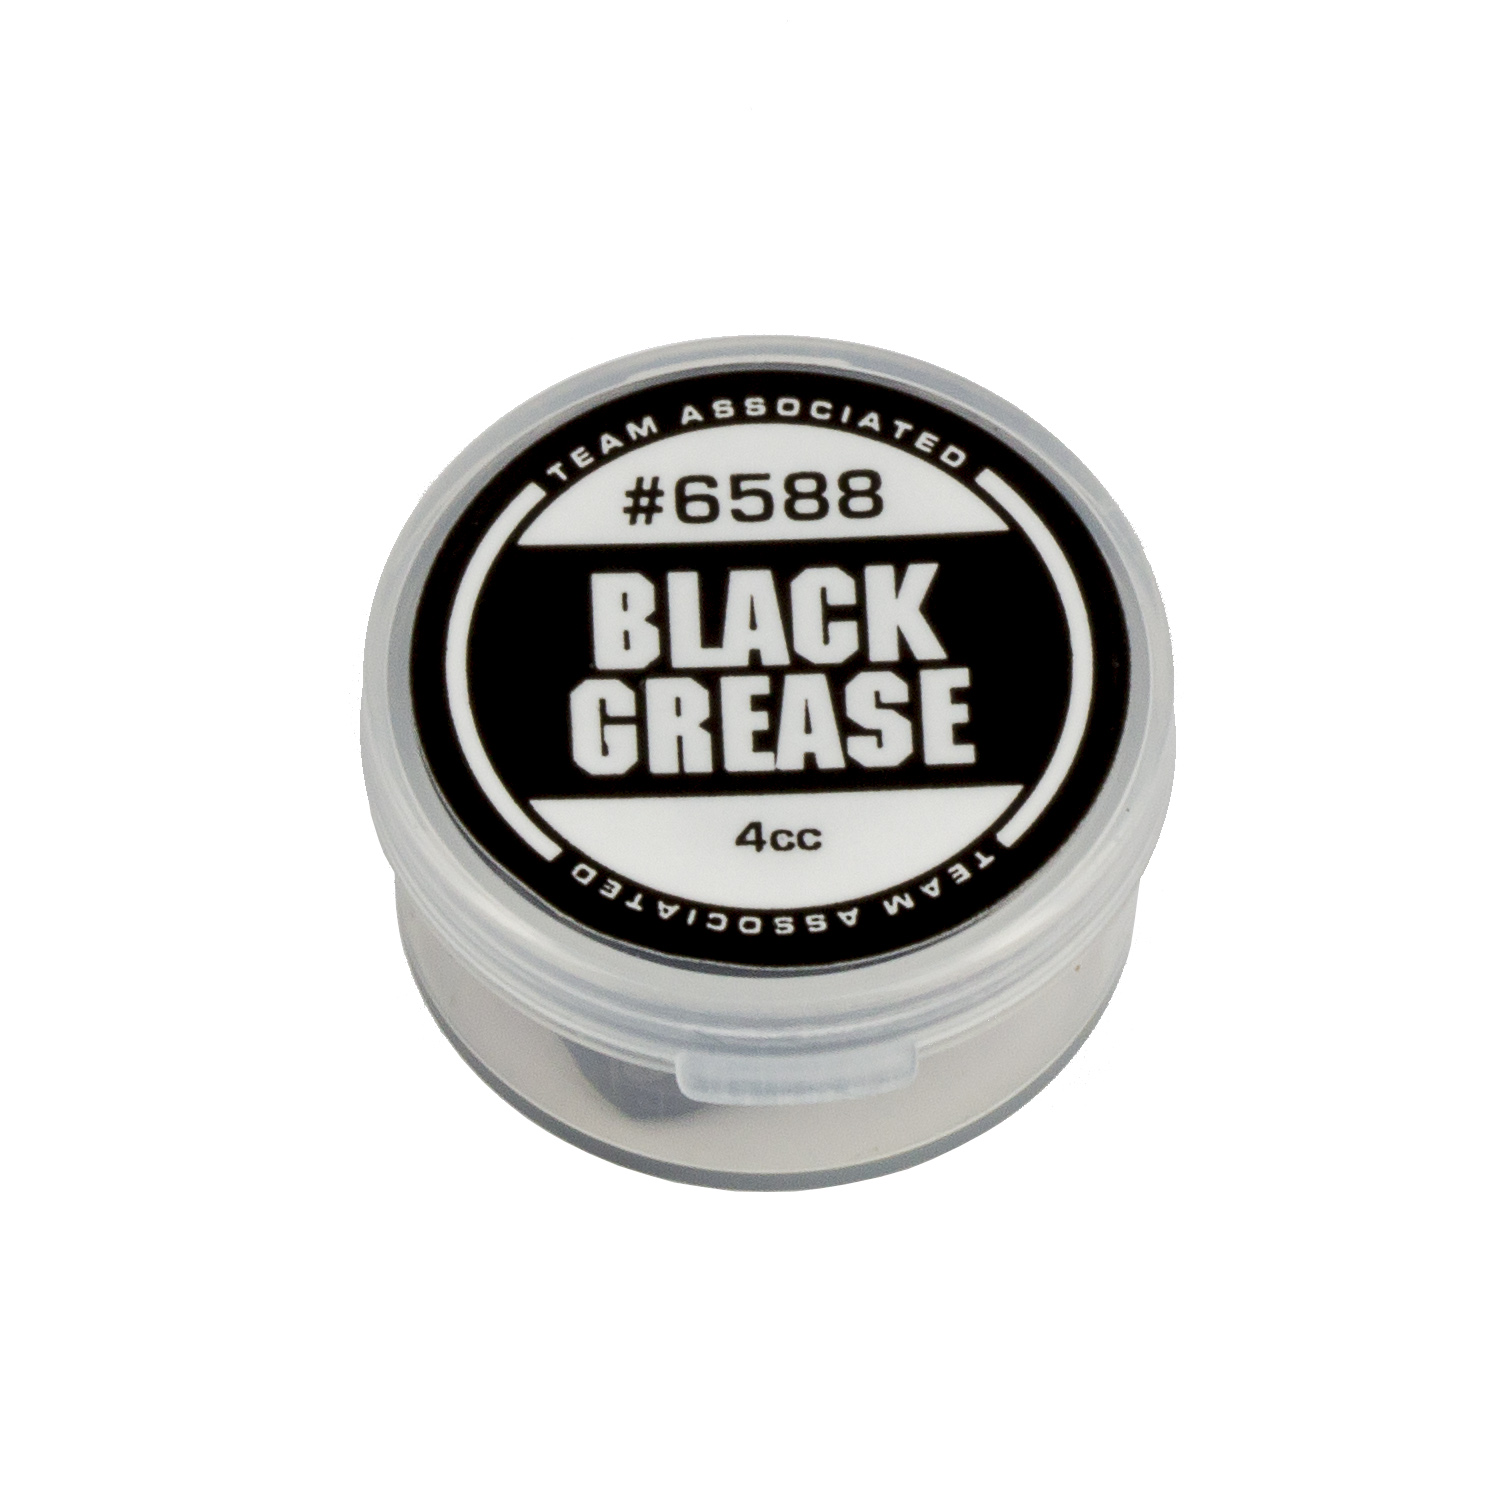 FT Black Grease, 4cc | Associated Electrics